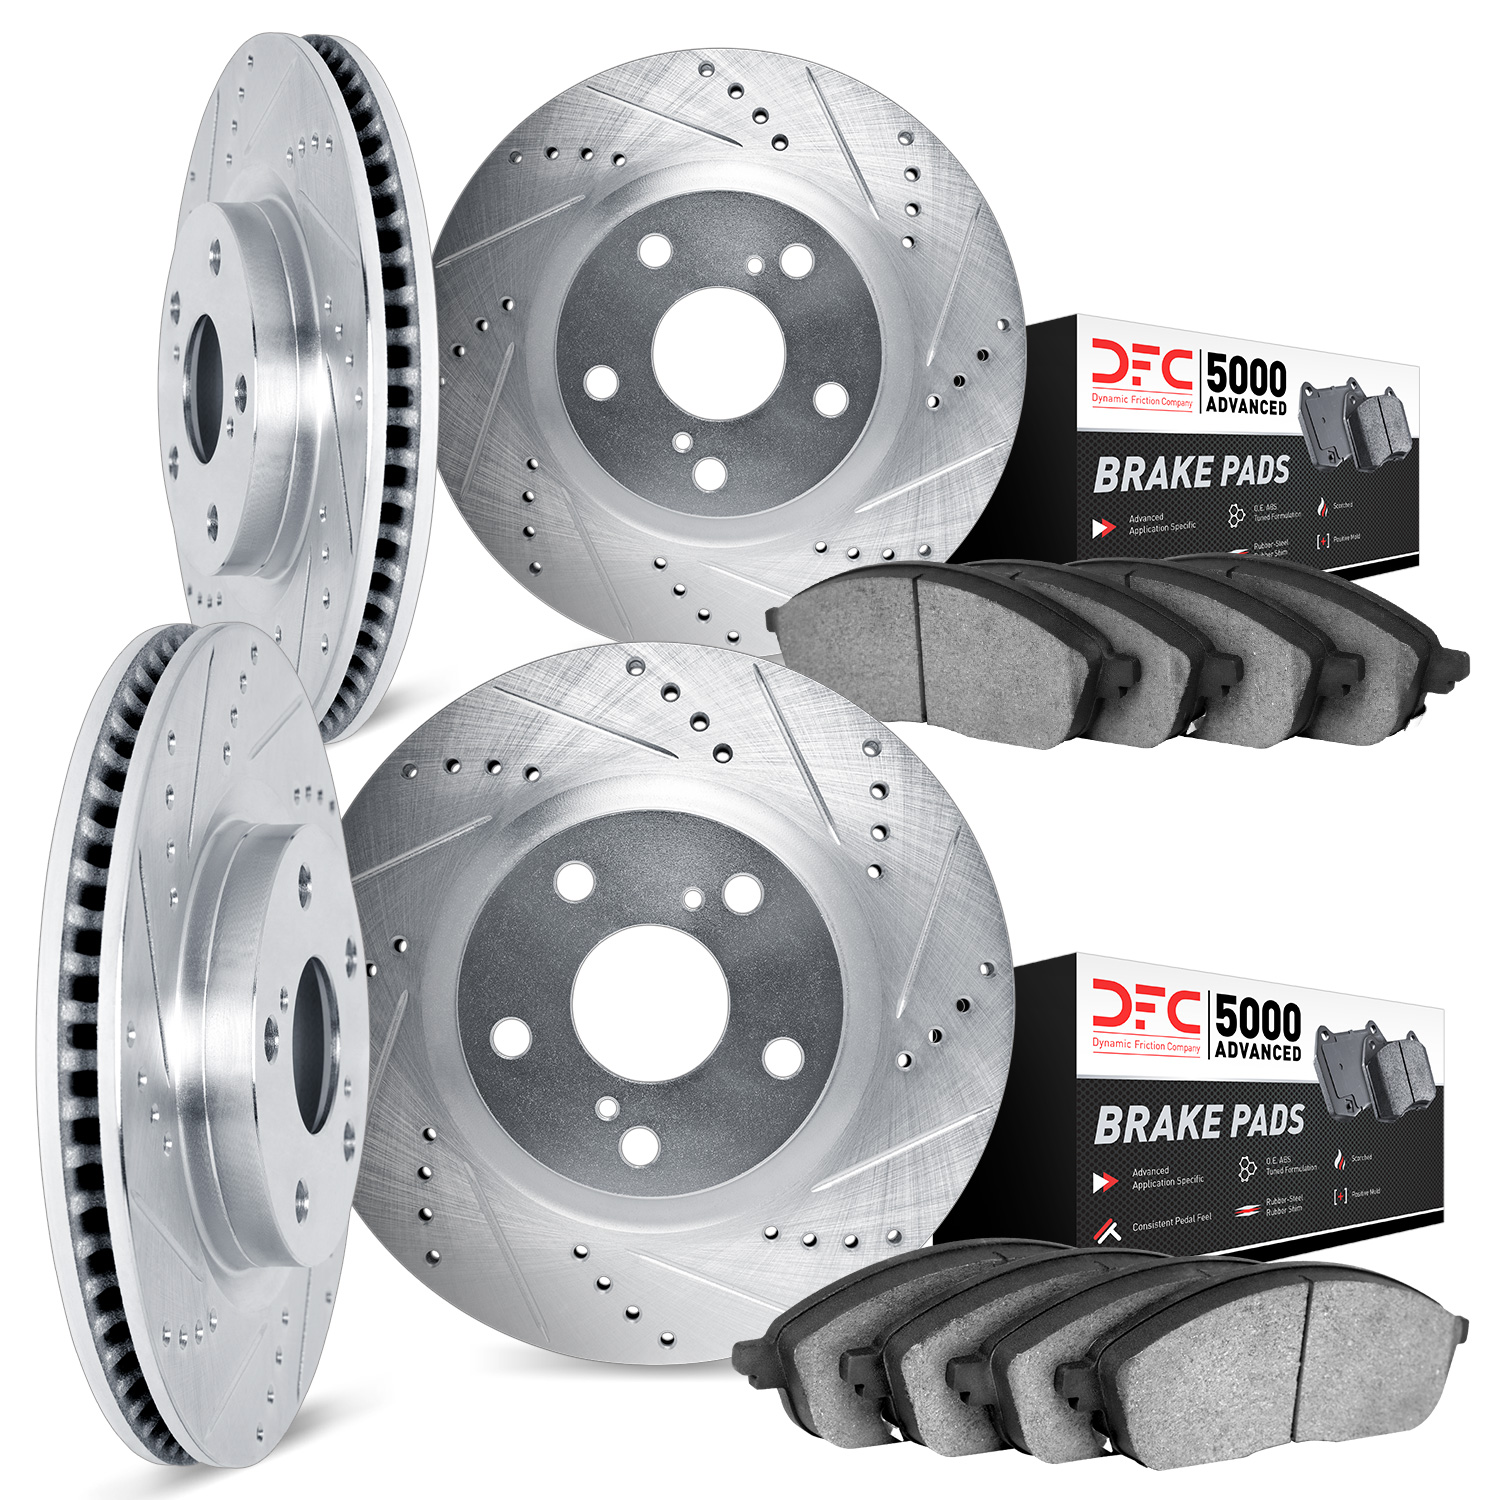 7504-39029 Drilled/Slotted Brake Rotors w/5000 Advanced Brake Pads Kit [Silver], 2006-2014 Mopar, Position: Front and Rear